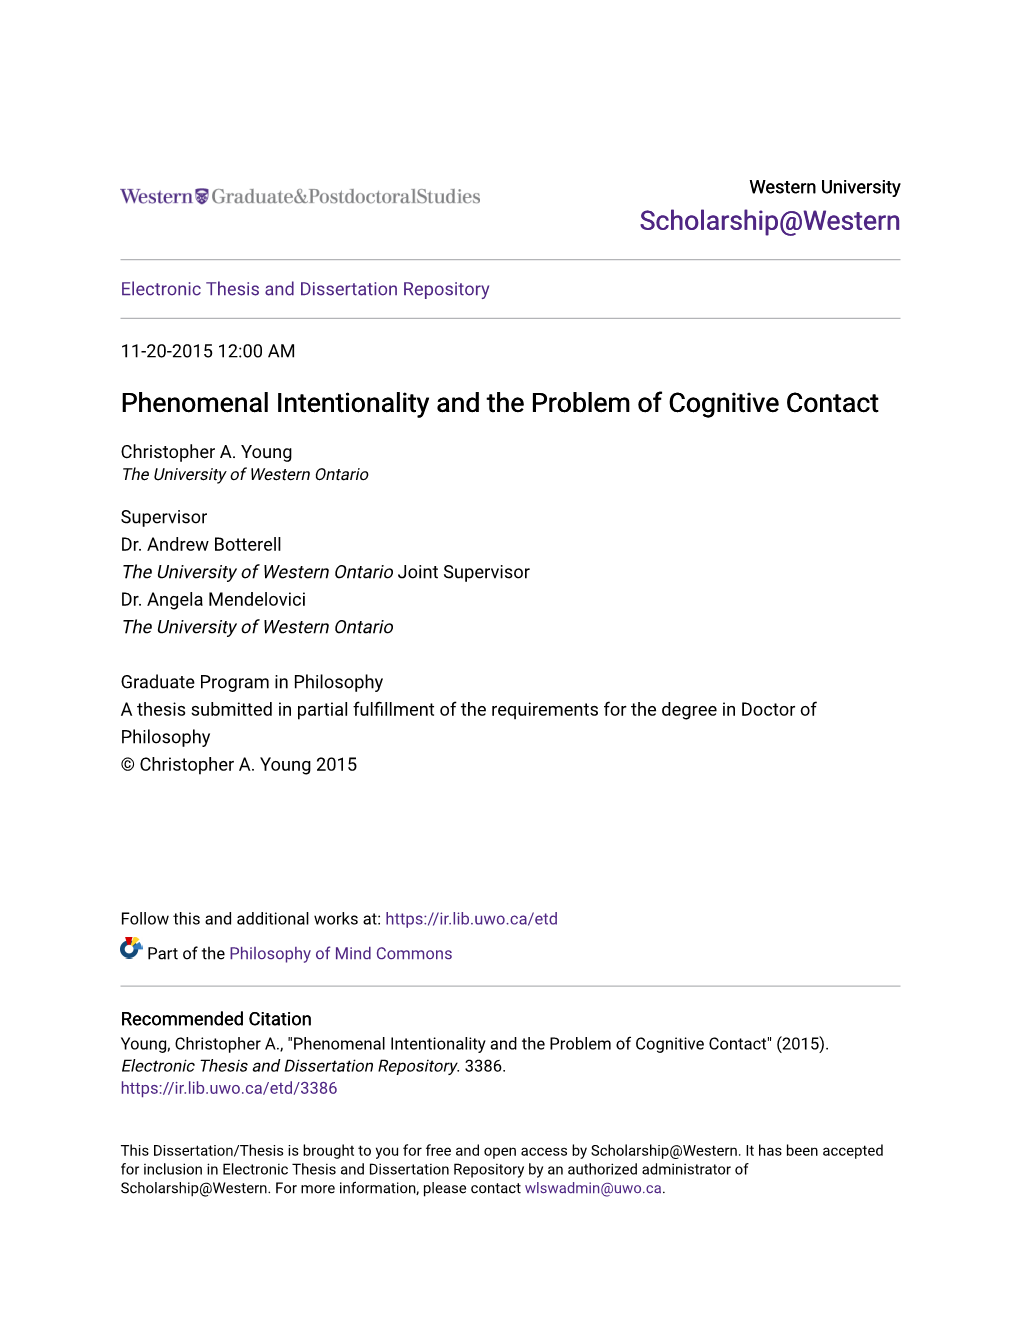 Phenomenal Intentionality and the Problem of Cognitive Contact